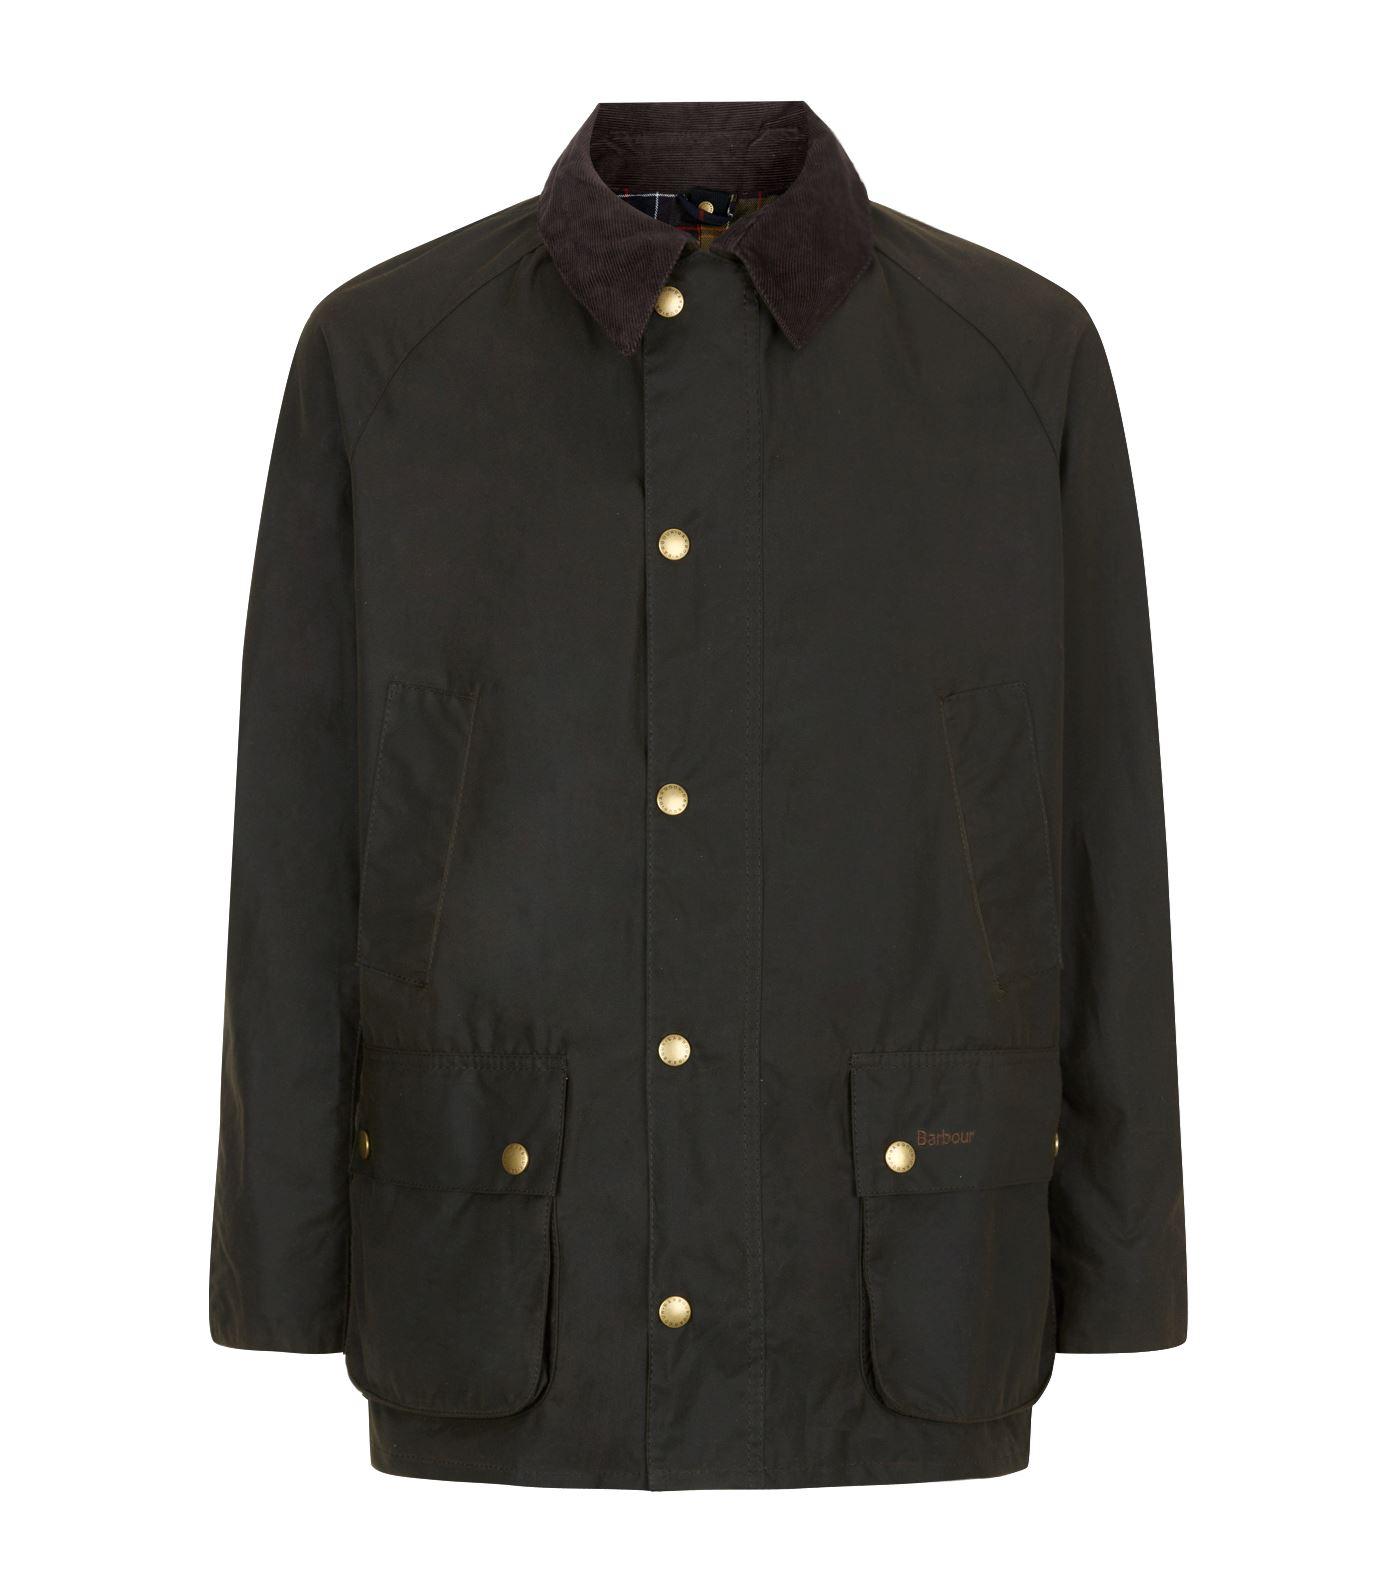 Barbour Corduroy Ashby Waxed Jacket in Green for Men - Lyst